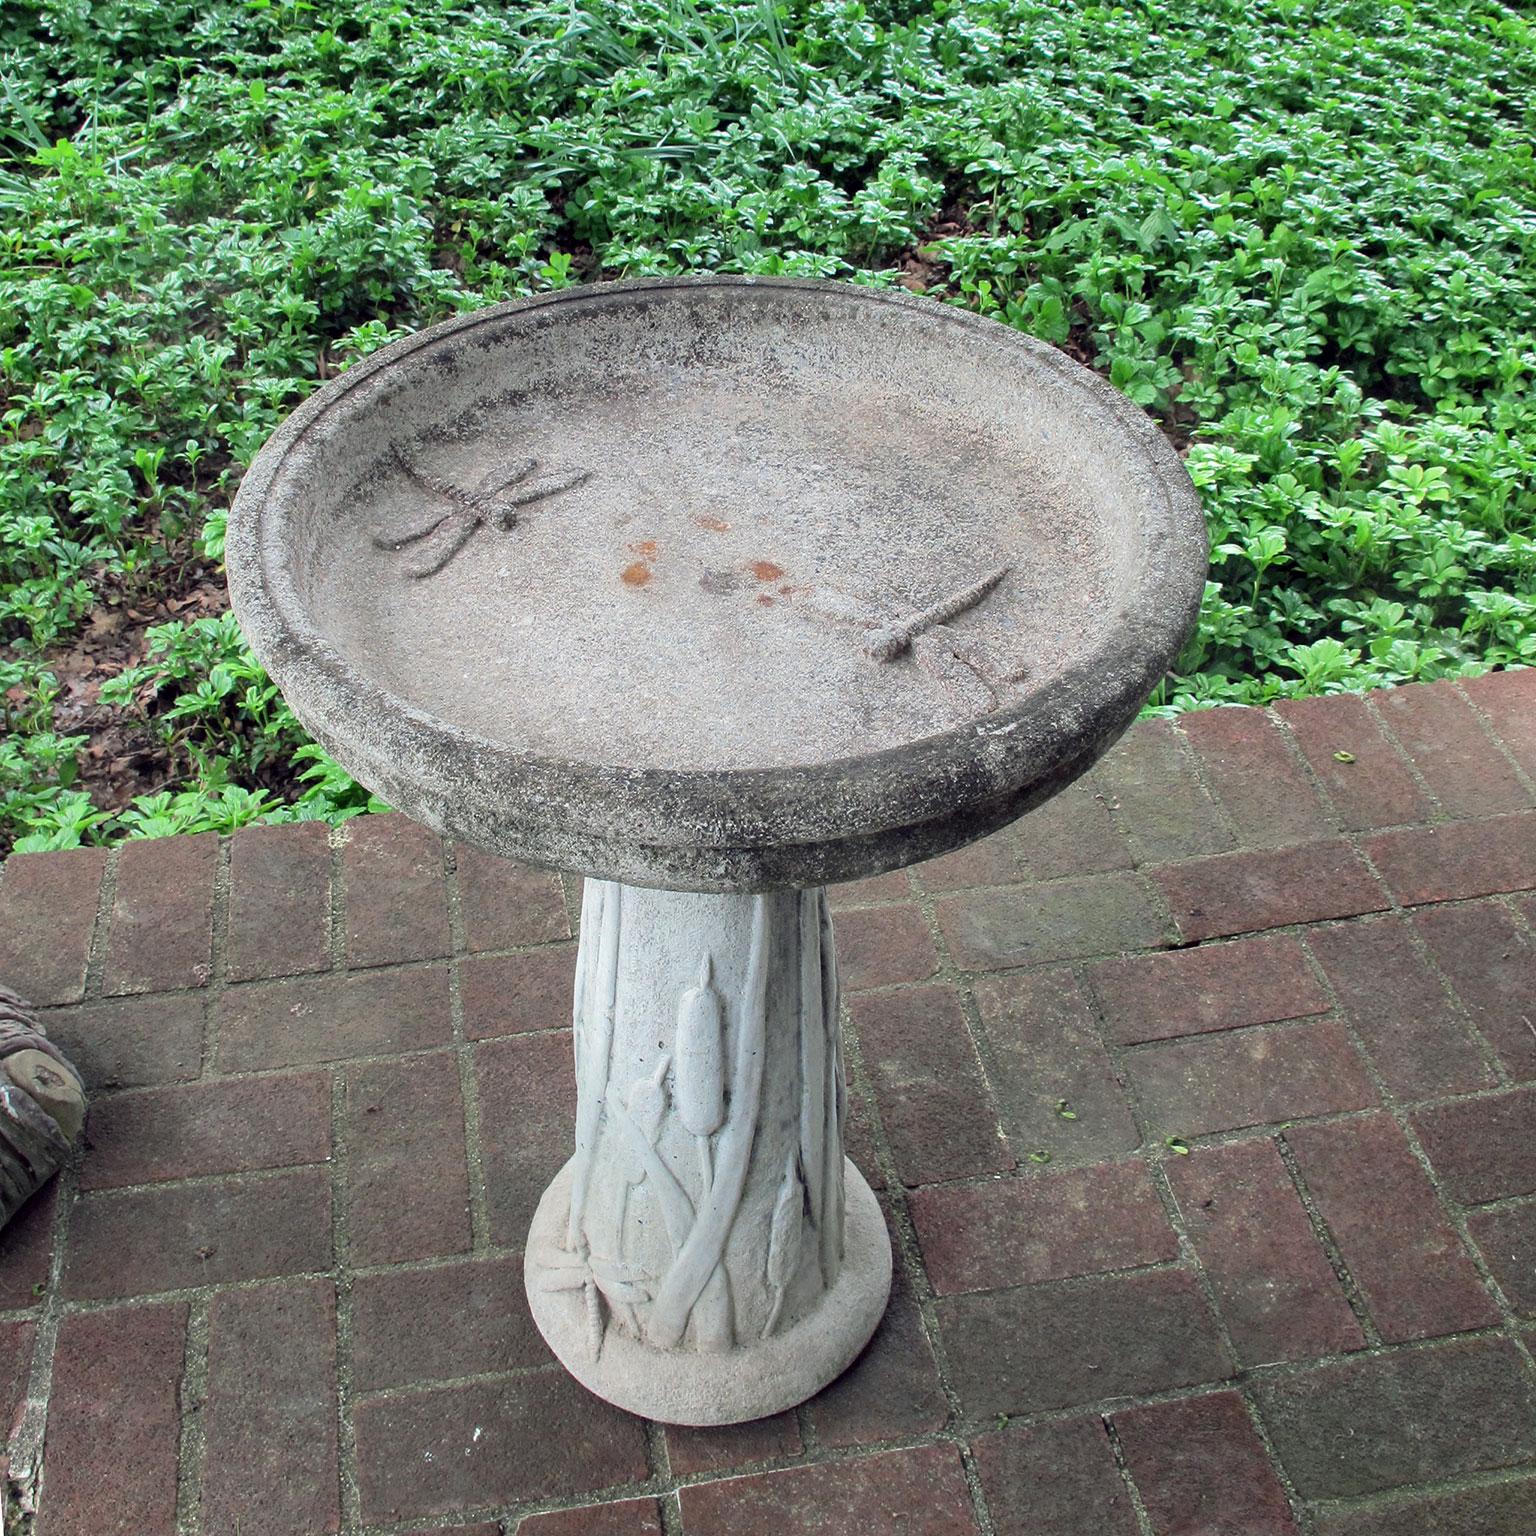 American Stone Bird Bath with Leaf and Insect Decoration